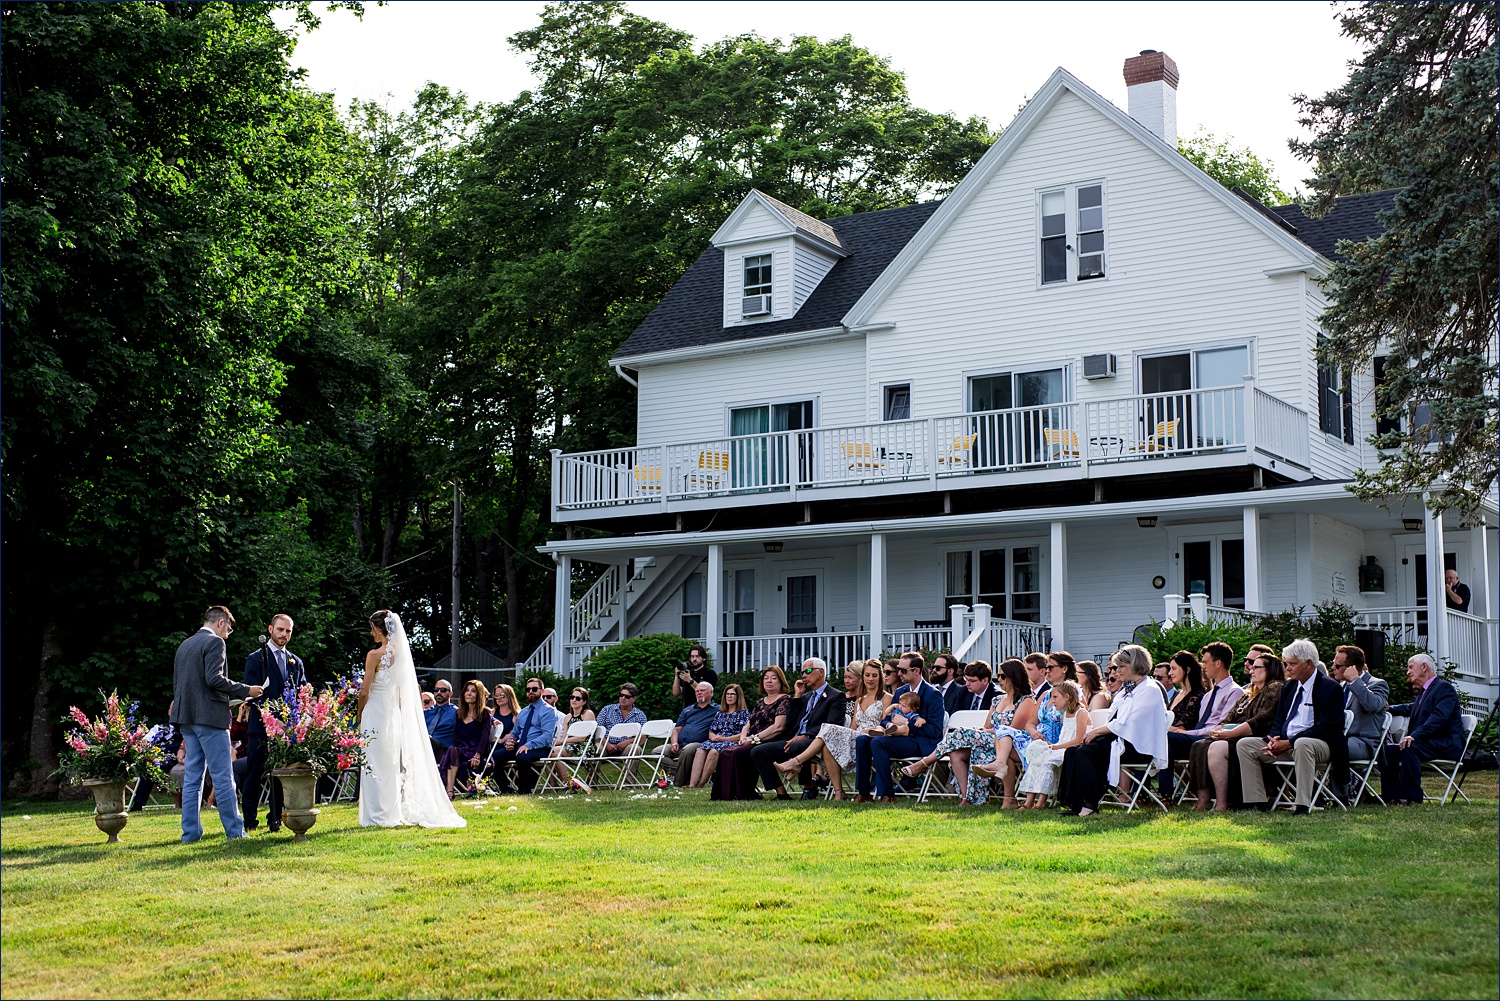 Dockside Guest Quarters wedding venue in York Maine is gorgeous for an outdoor ceremony